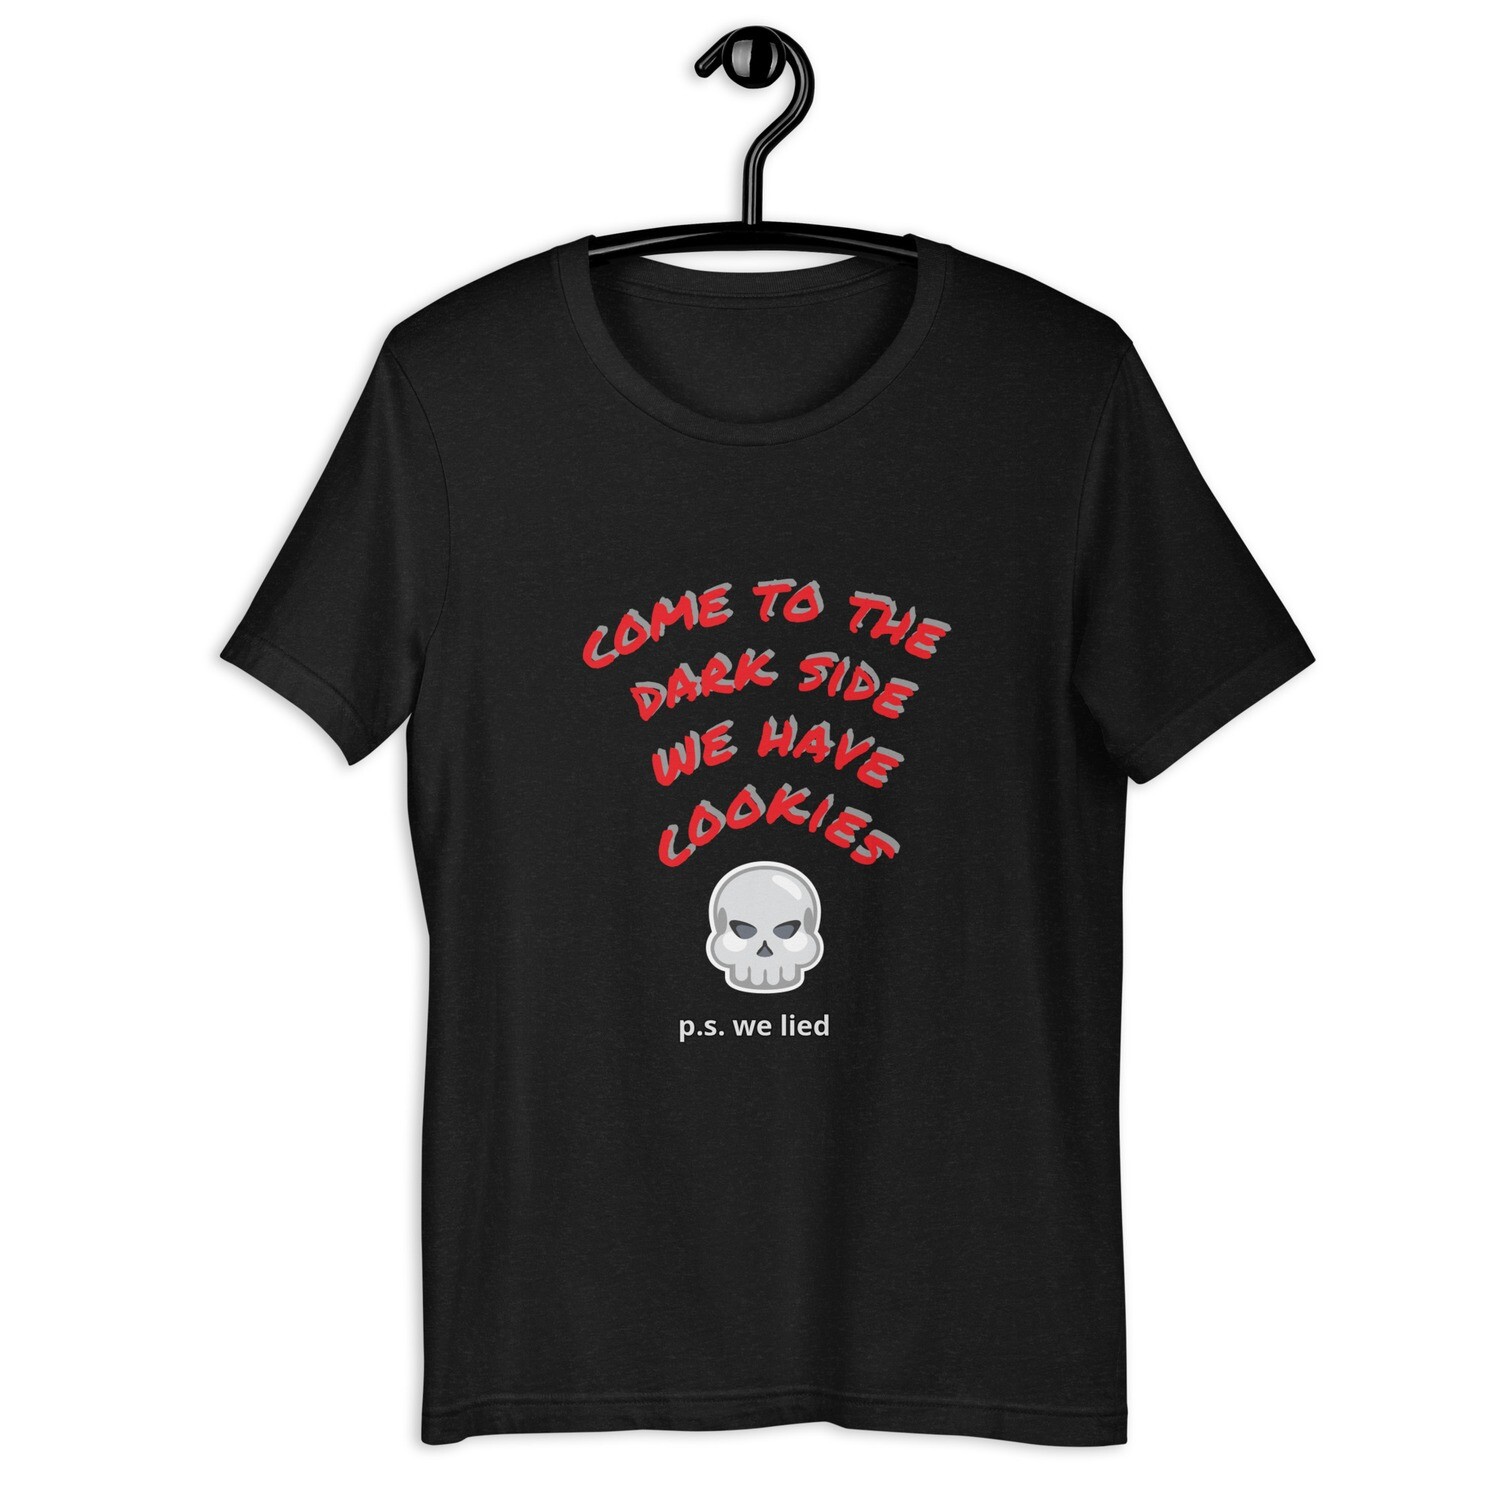 "Come to the dark side we have cookies" "p.s. we lied" Unisex t-shirt